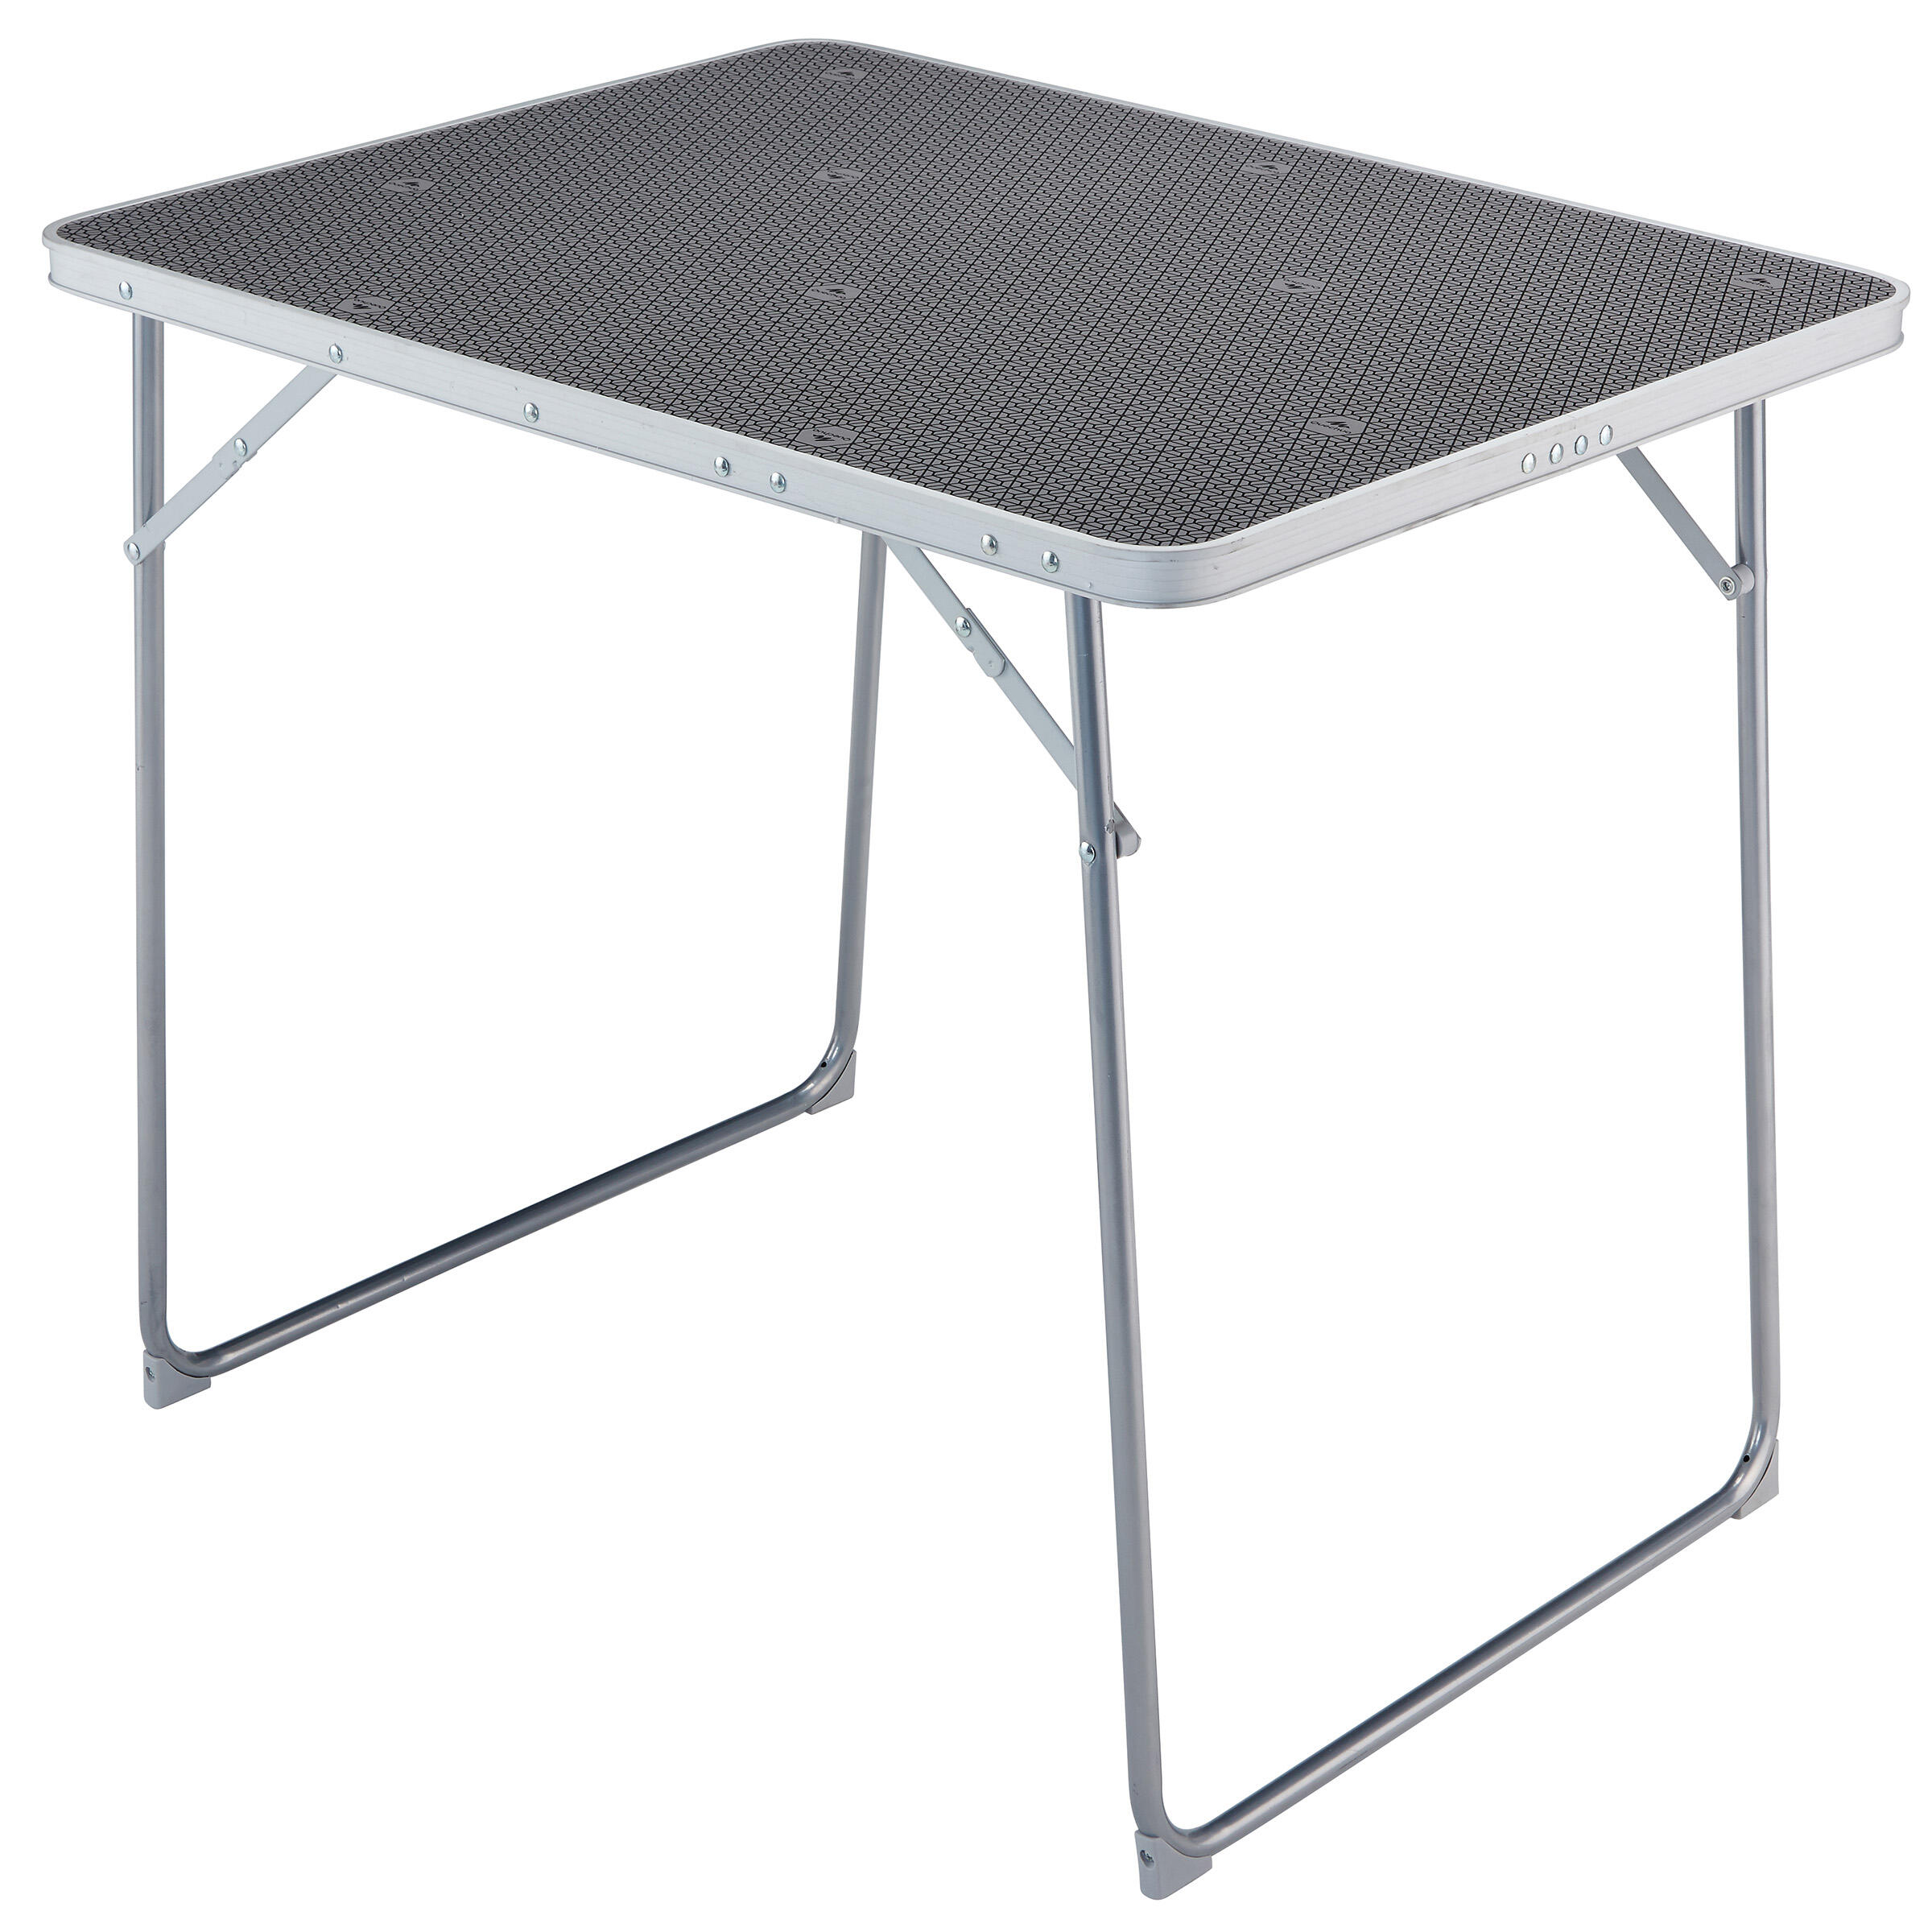 QUECHUA Folding Camping Table - 2 to 4 People